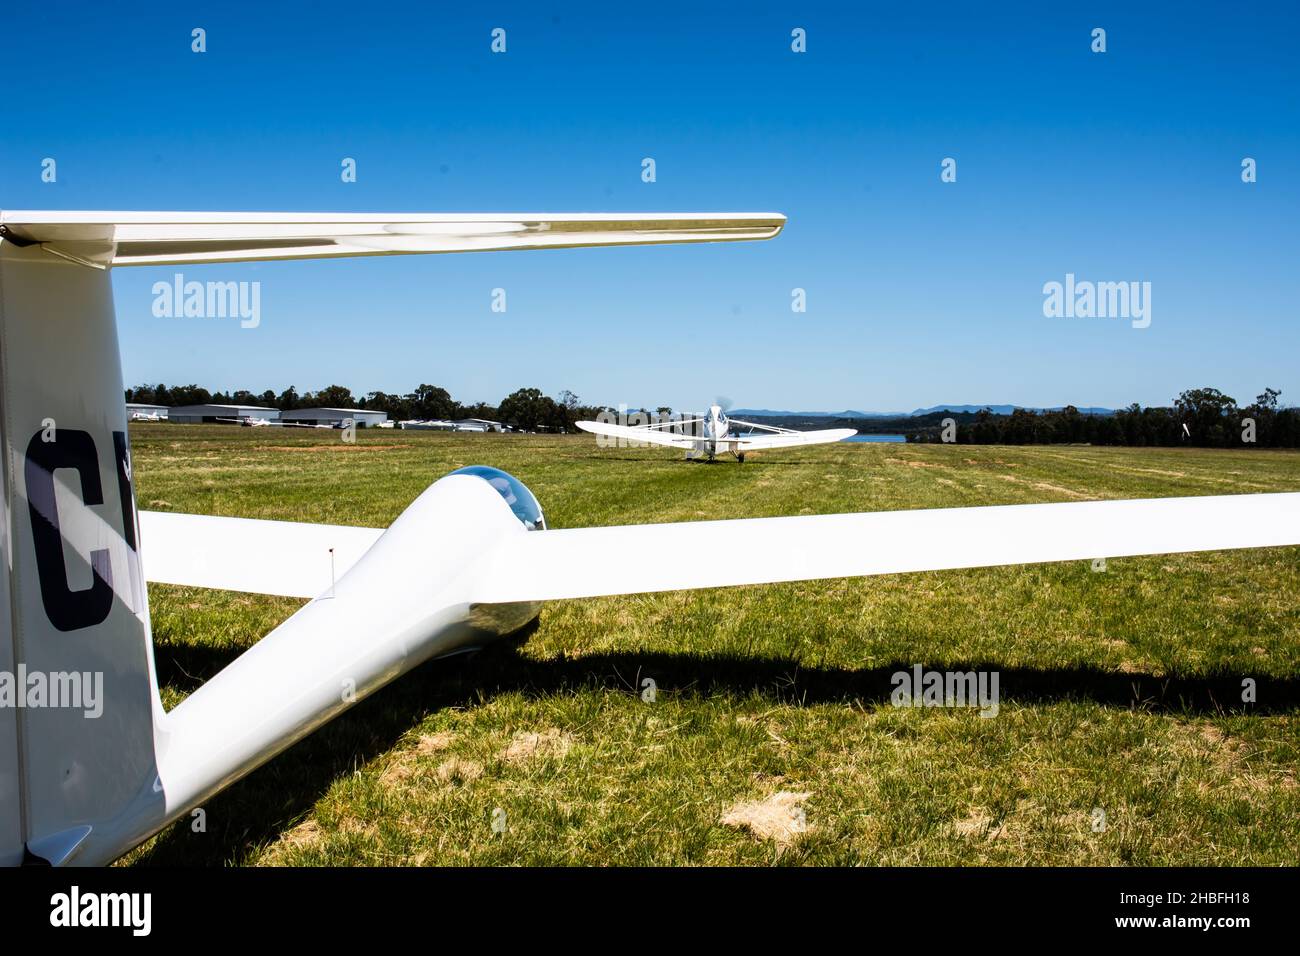 Plane taking up the slack of tow cable to launch a Schleicher, AS K21 sailplane at Lake Keepit Soaring Club,Gunnedah NSW Australia. Stock Photo